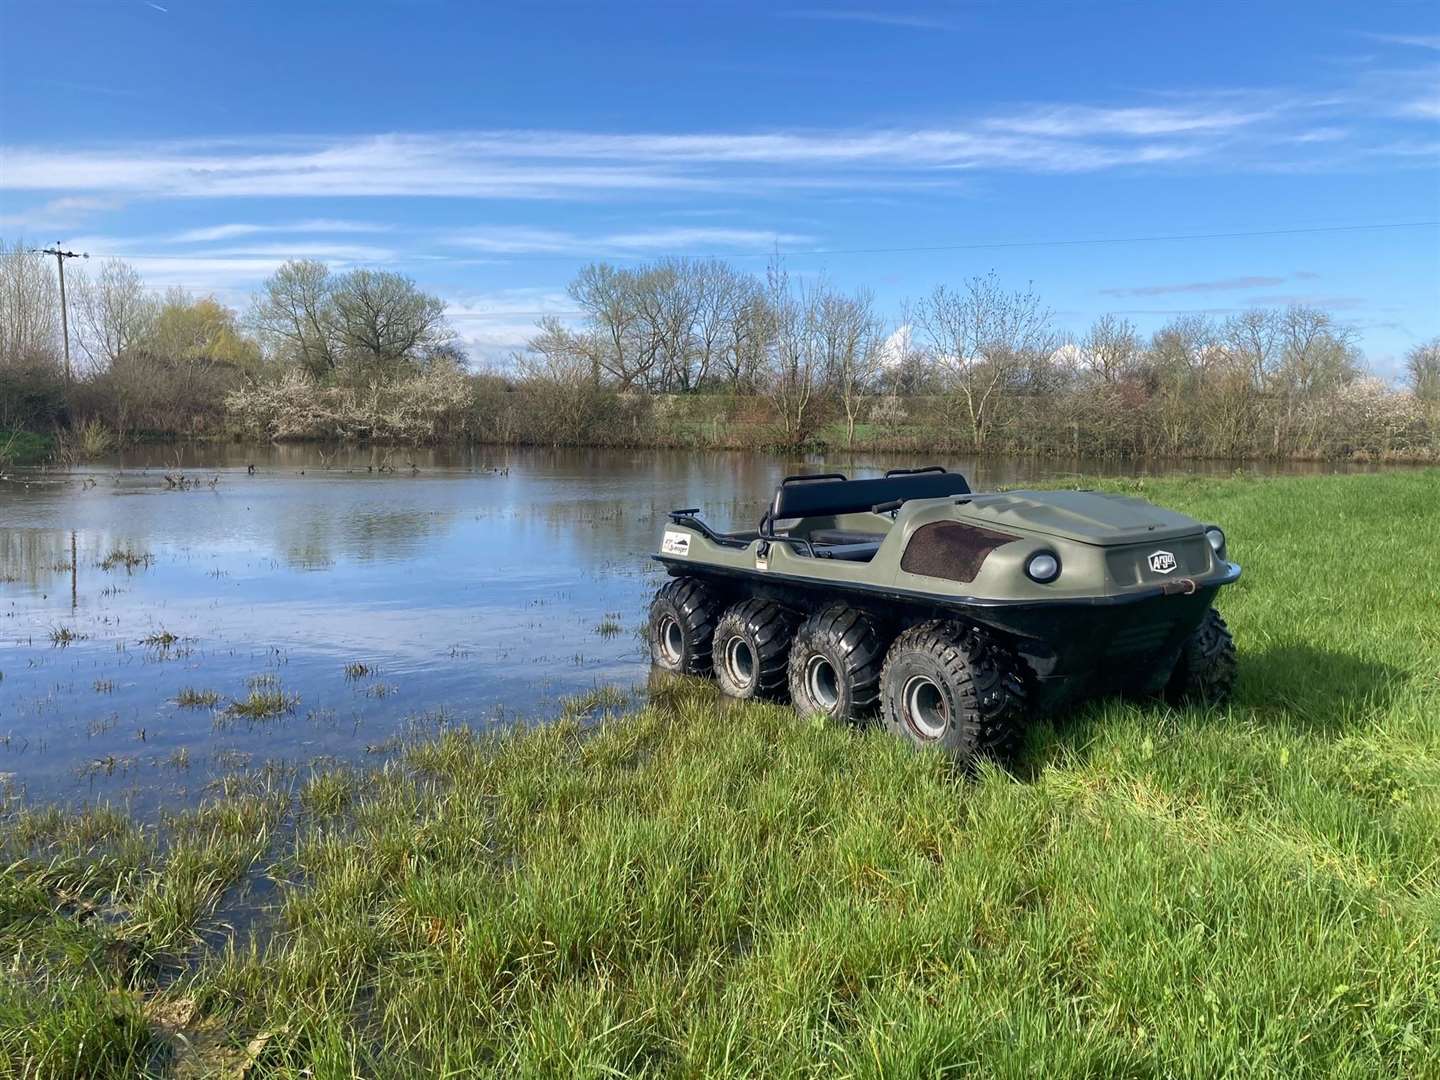 An Argo Avenger 8×8 amphibious all-terrain vehicle, bought new by Jeremy Clarkson in 2005, is to be sold at auction (Cheffins/PA)